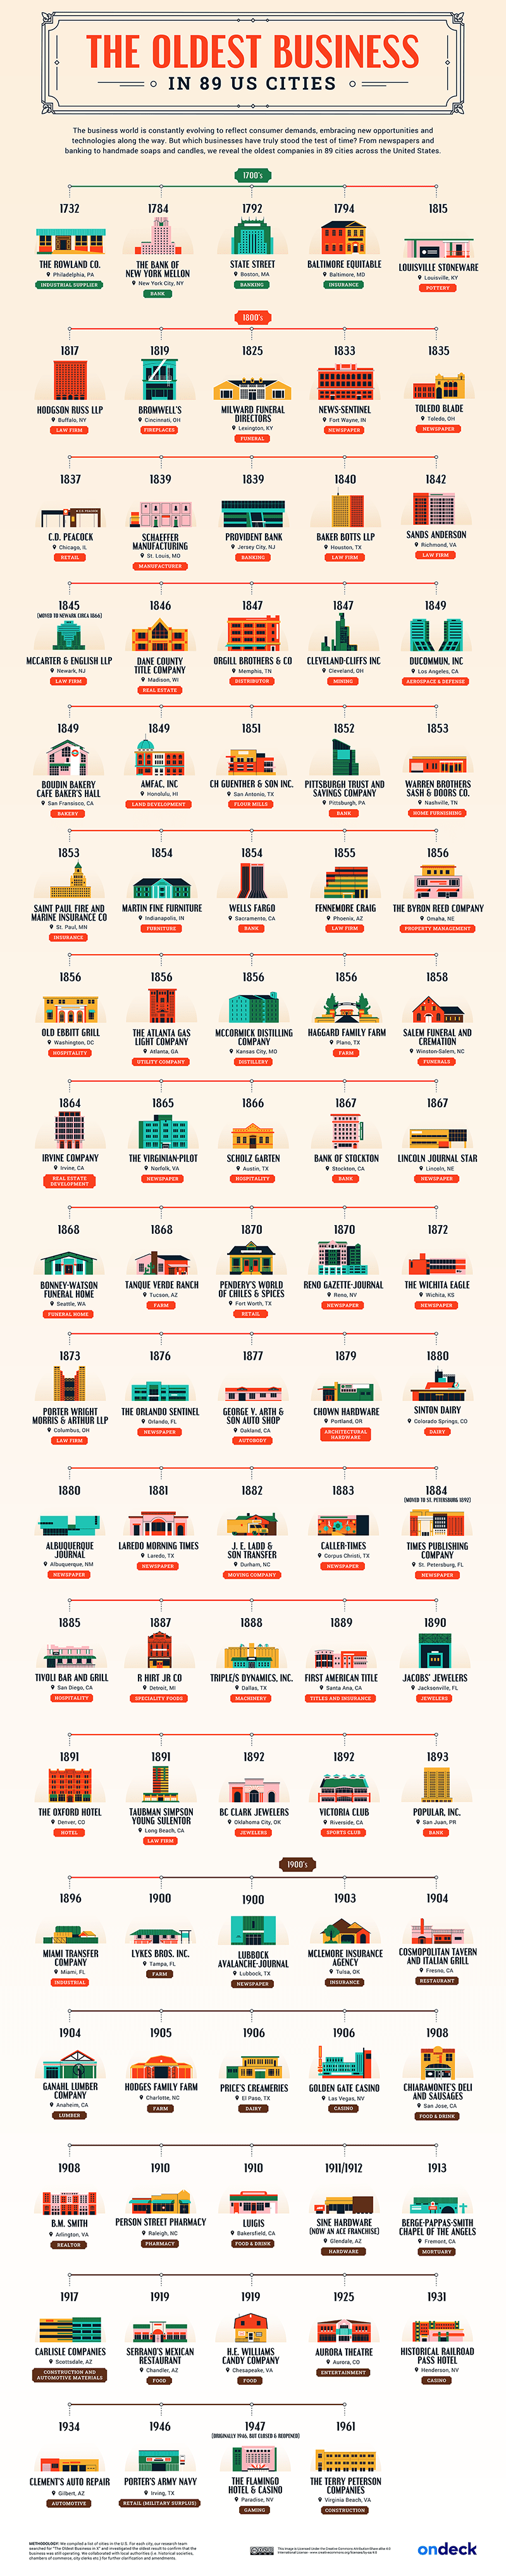 oldest businesses in US infographic